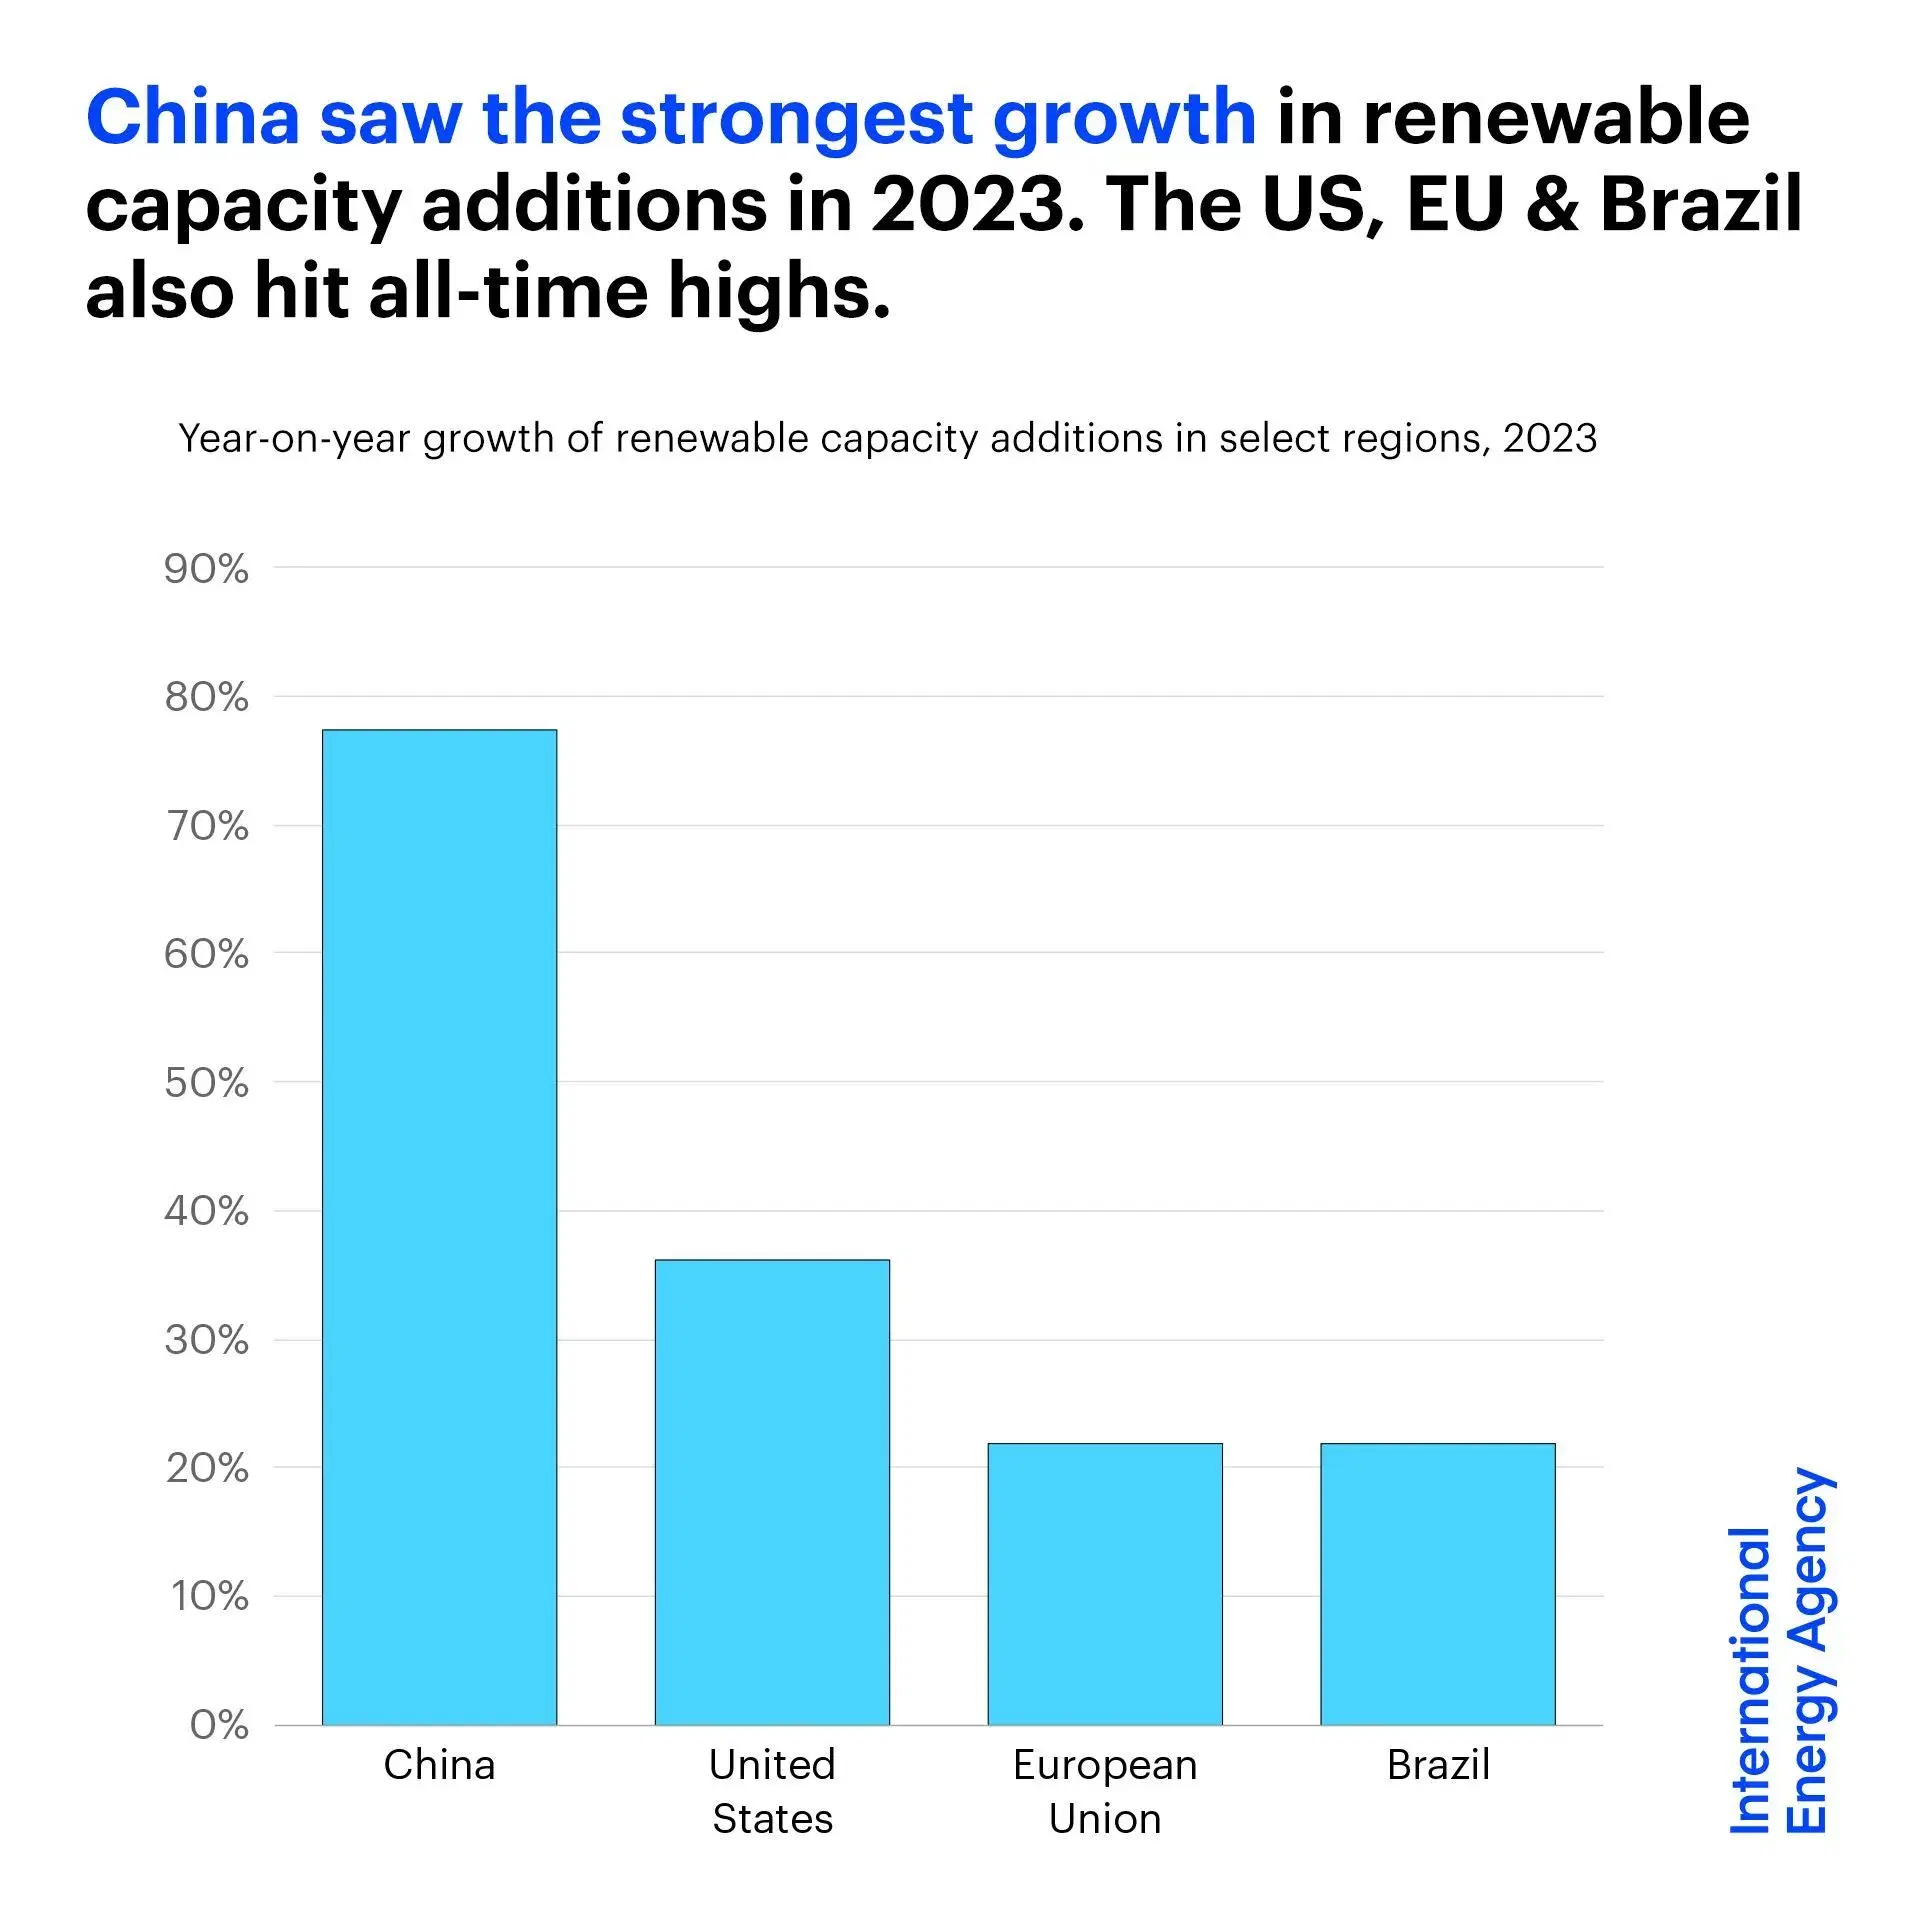 China saw the strongest growth in renewable capacity additions in 2023